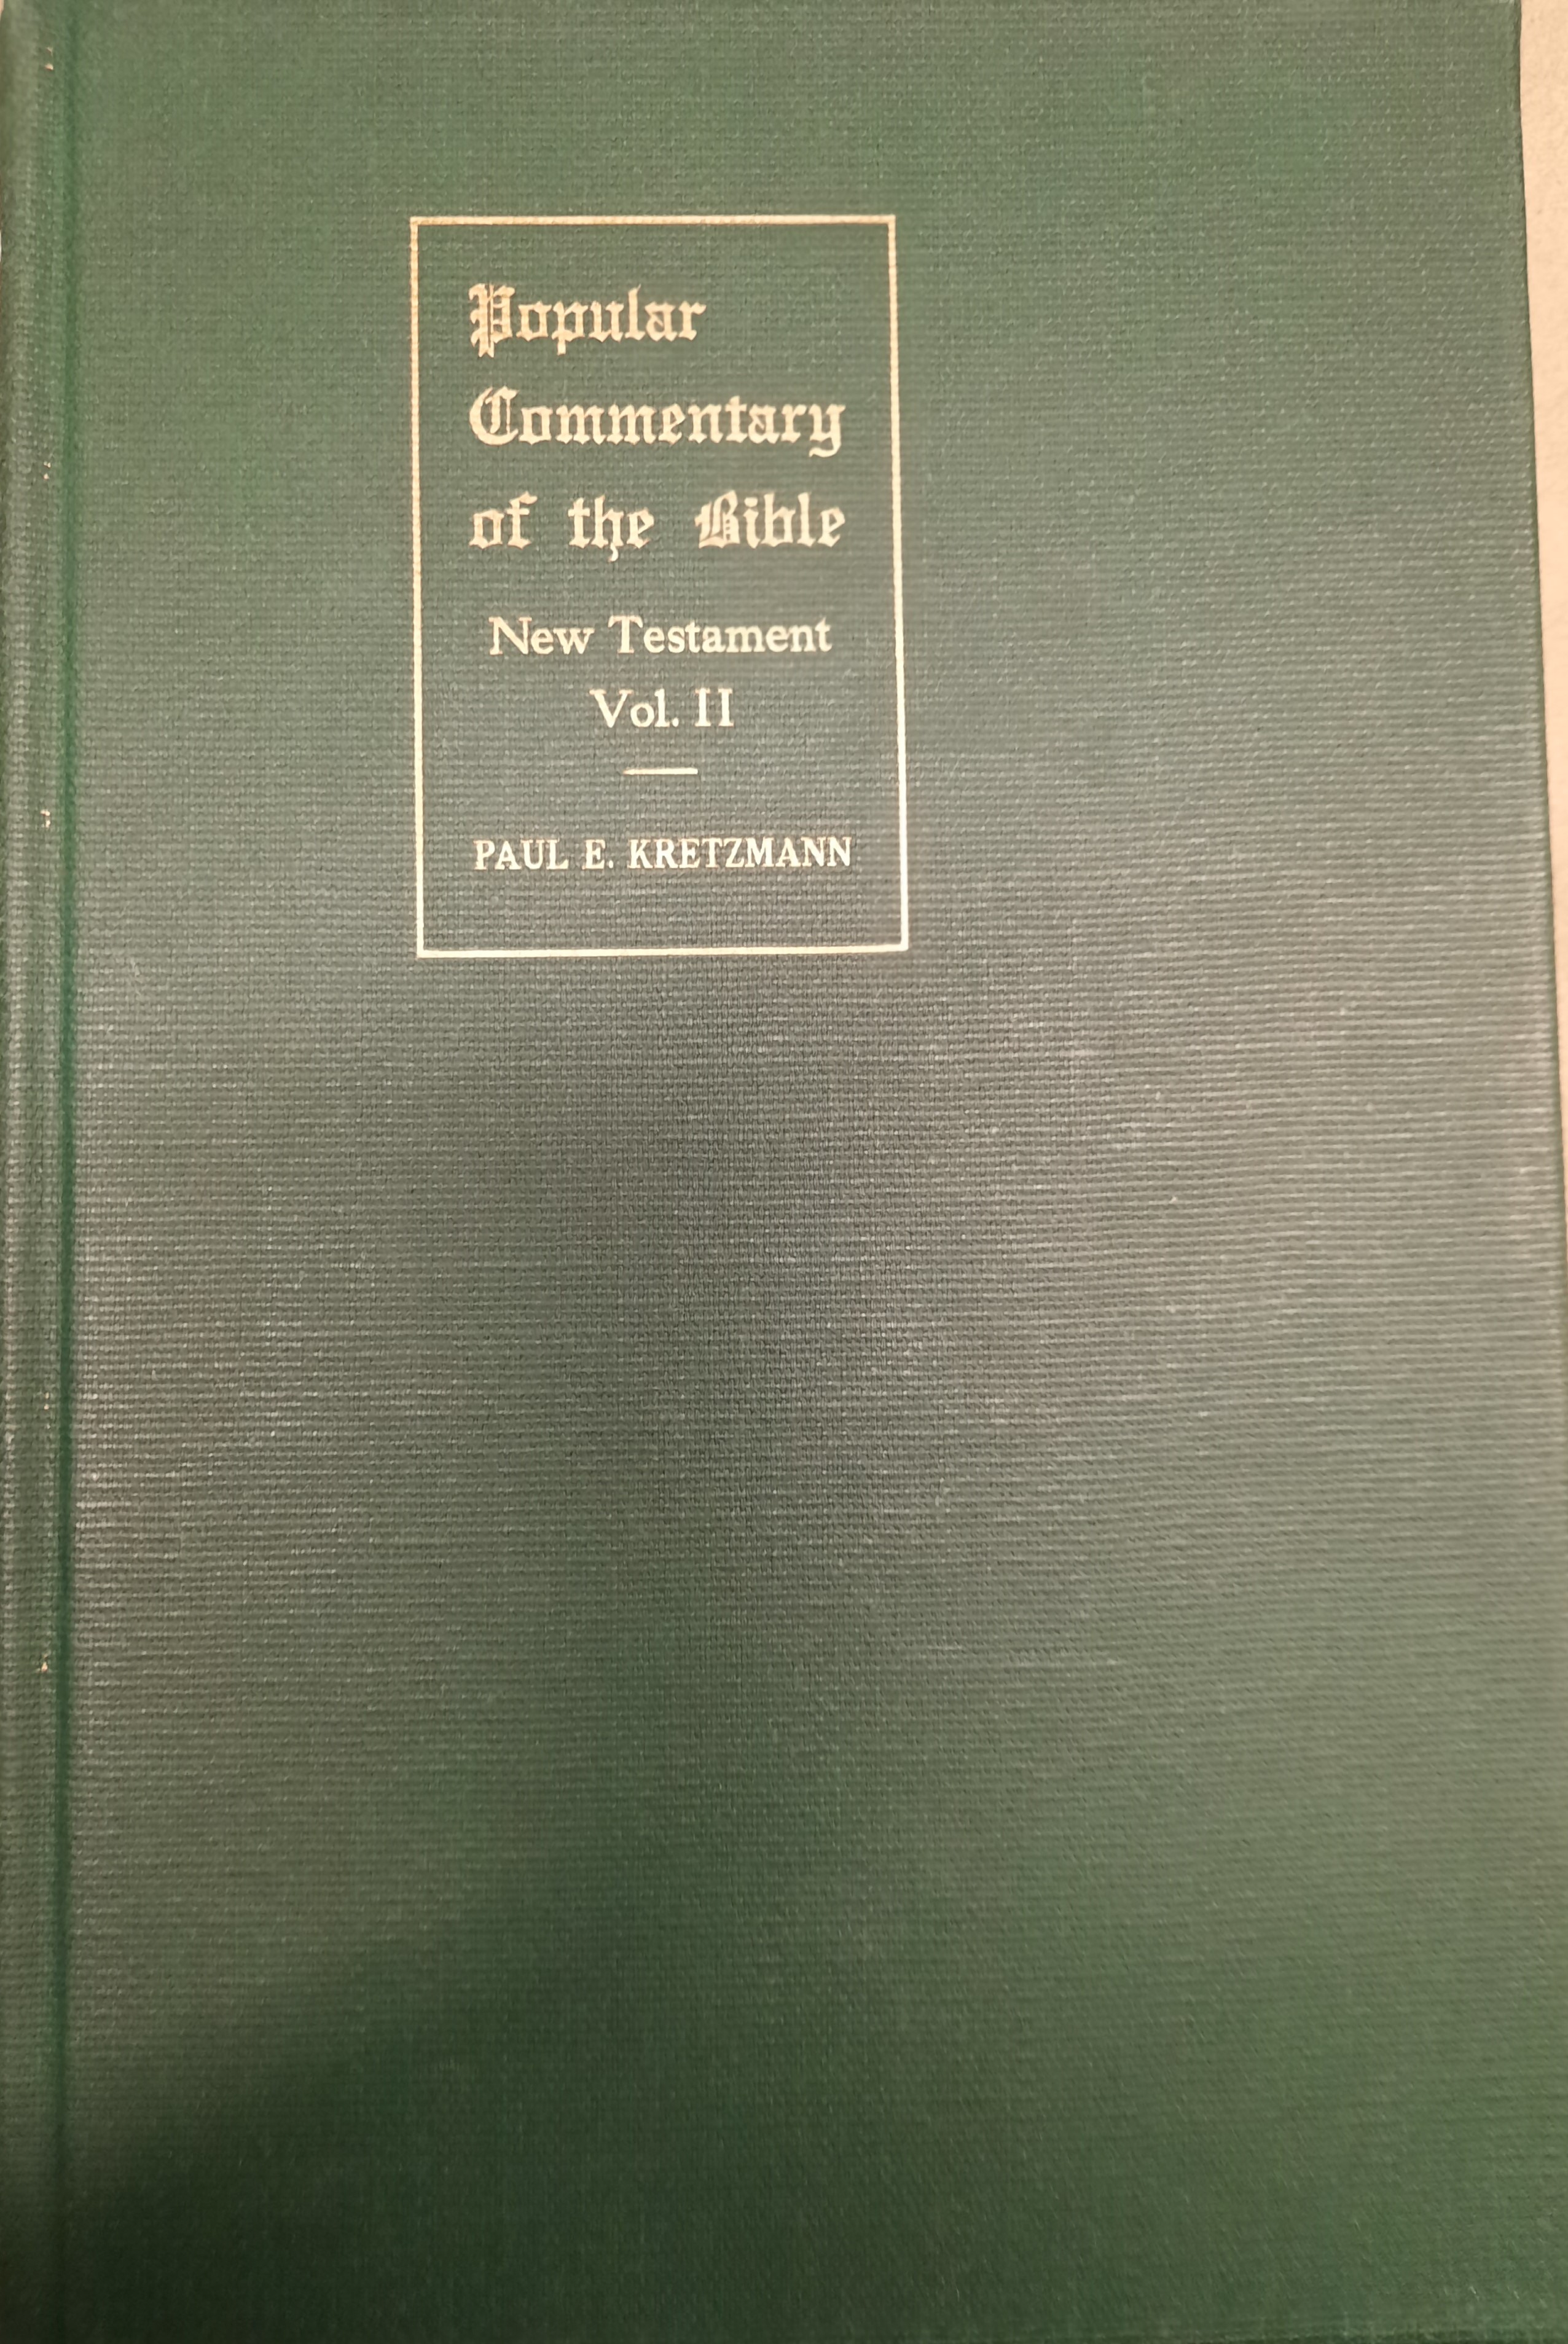 Popular Commentary of the Bible New Testament Vol. II